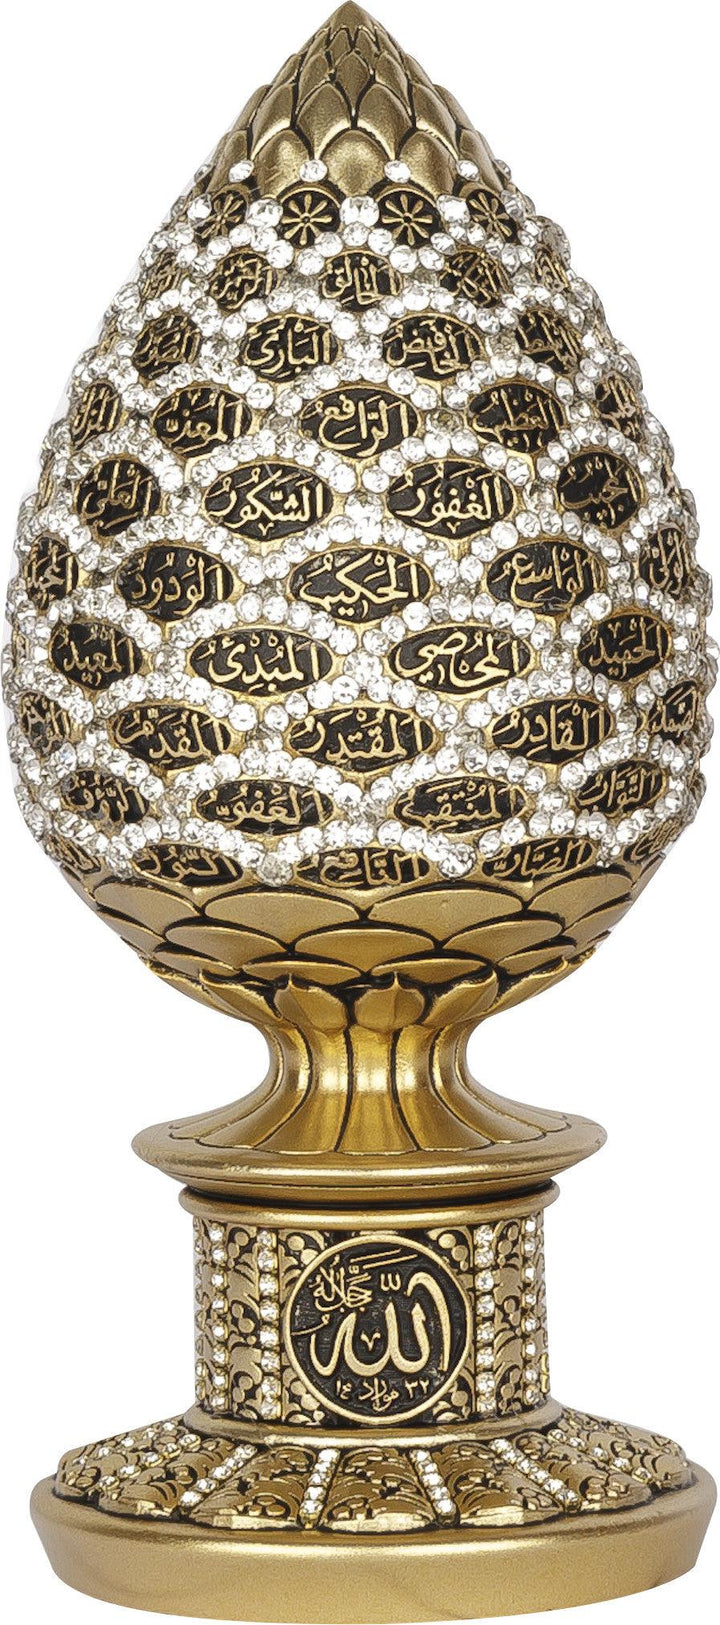 Islamic Table Decor Golden pine cone with White stones - 99 Names of Allah Alif collection BB-0930-1667-theislamicshop.com